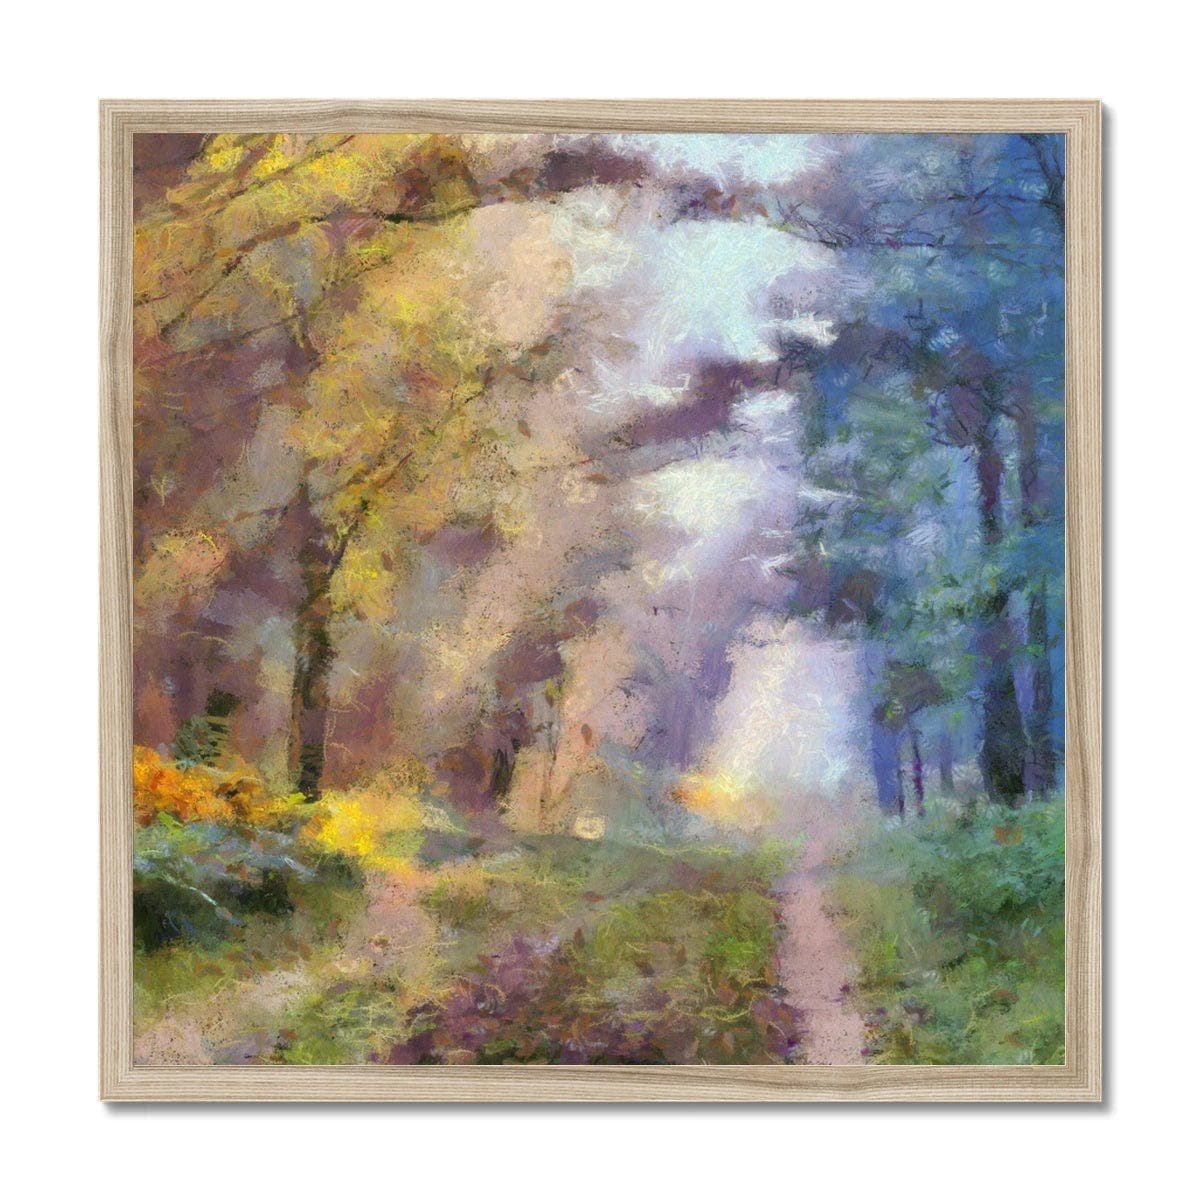 Early Morning Strole in the Woods Framed Print